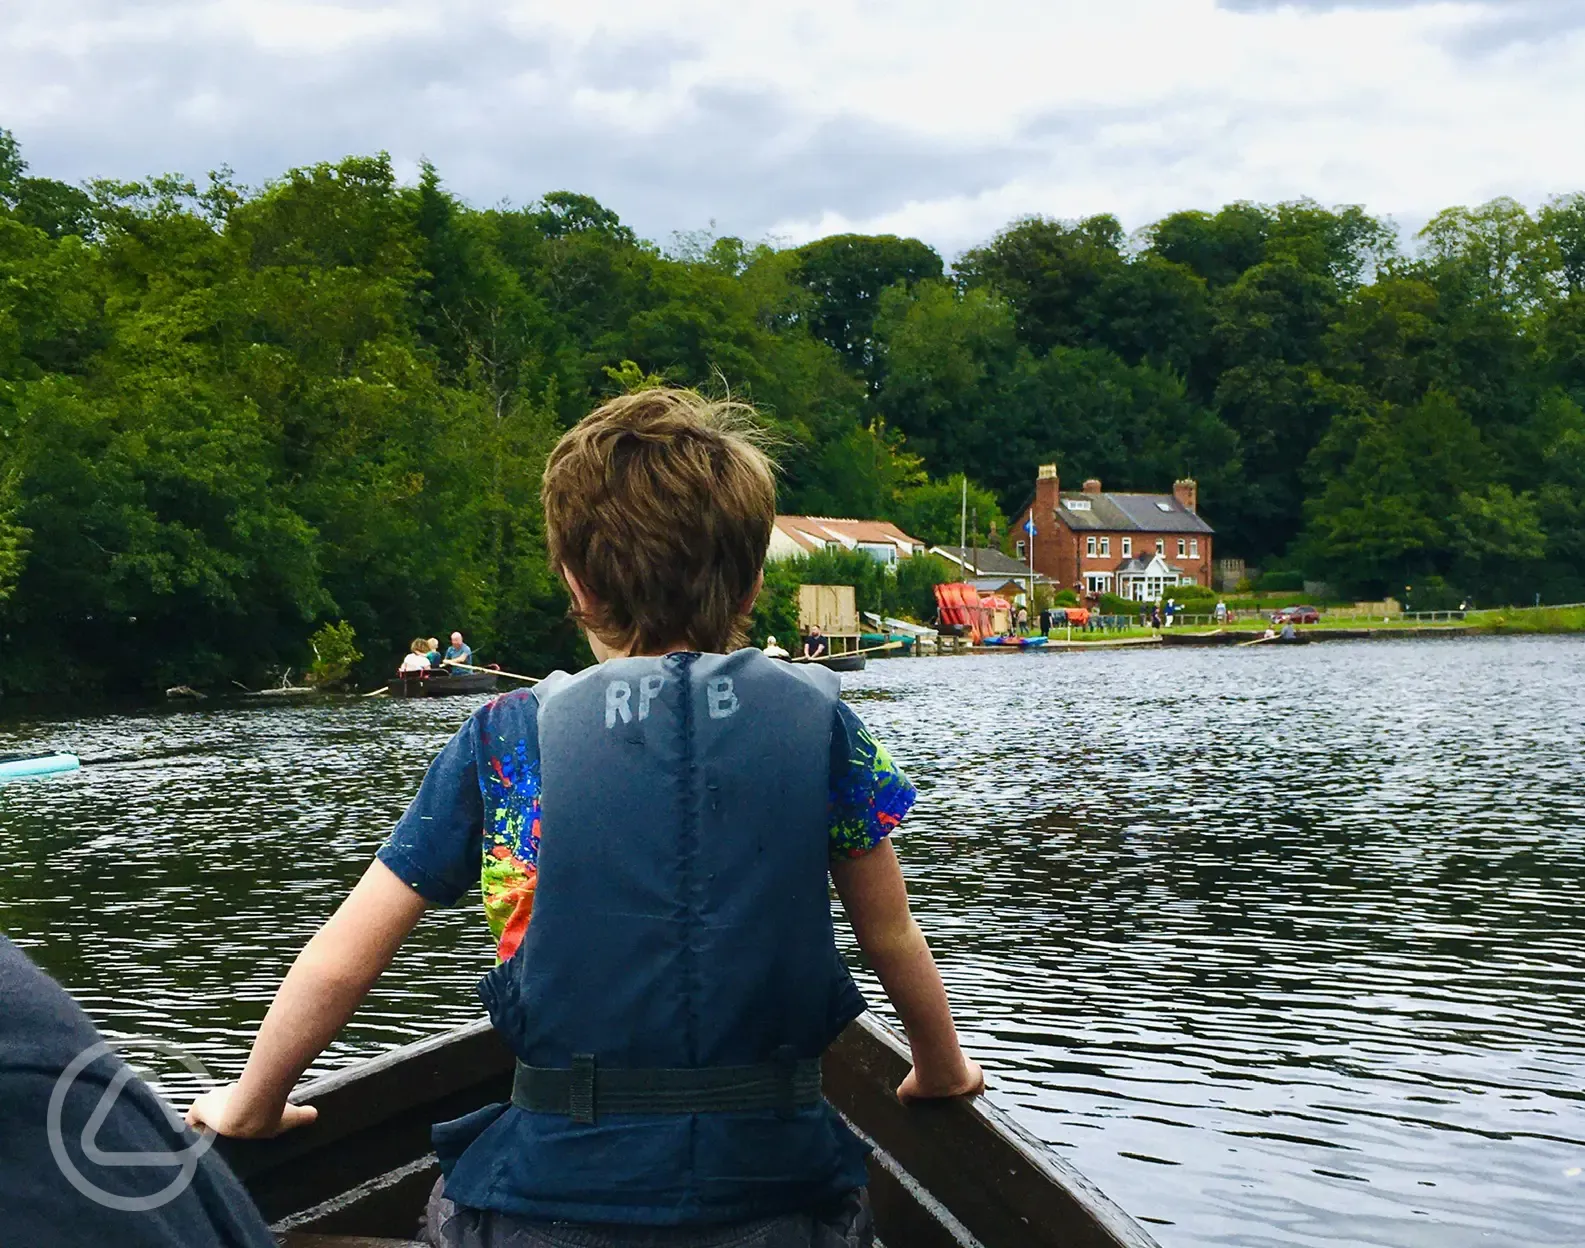 Boating on the river Esk, or paddle board or canoe.